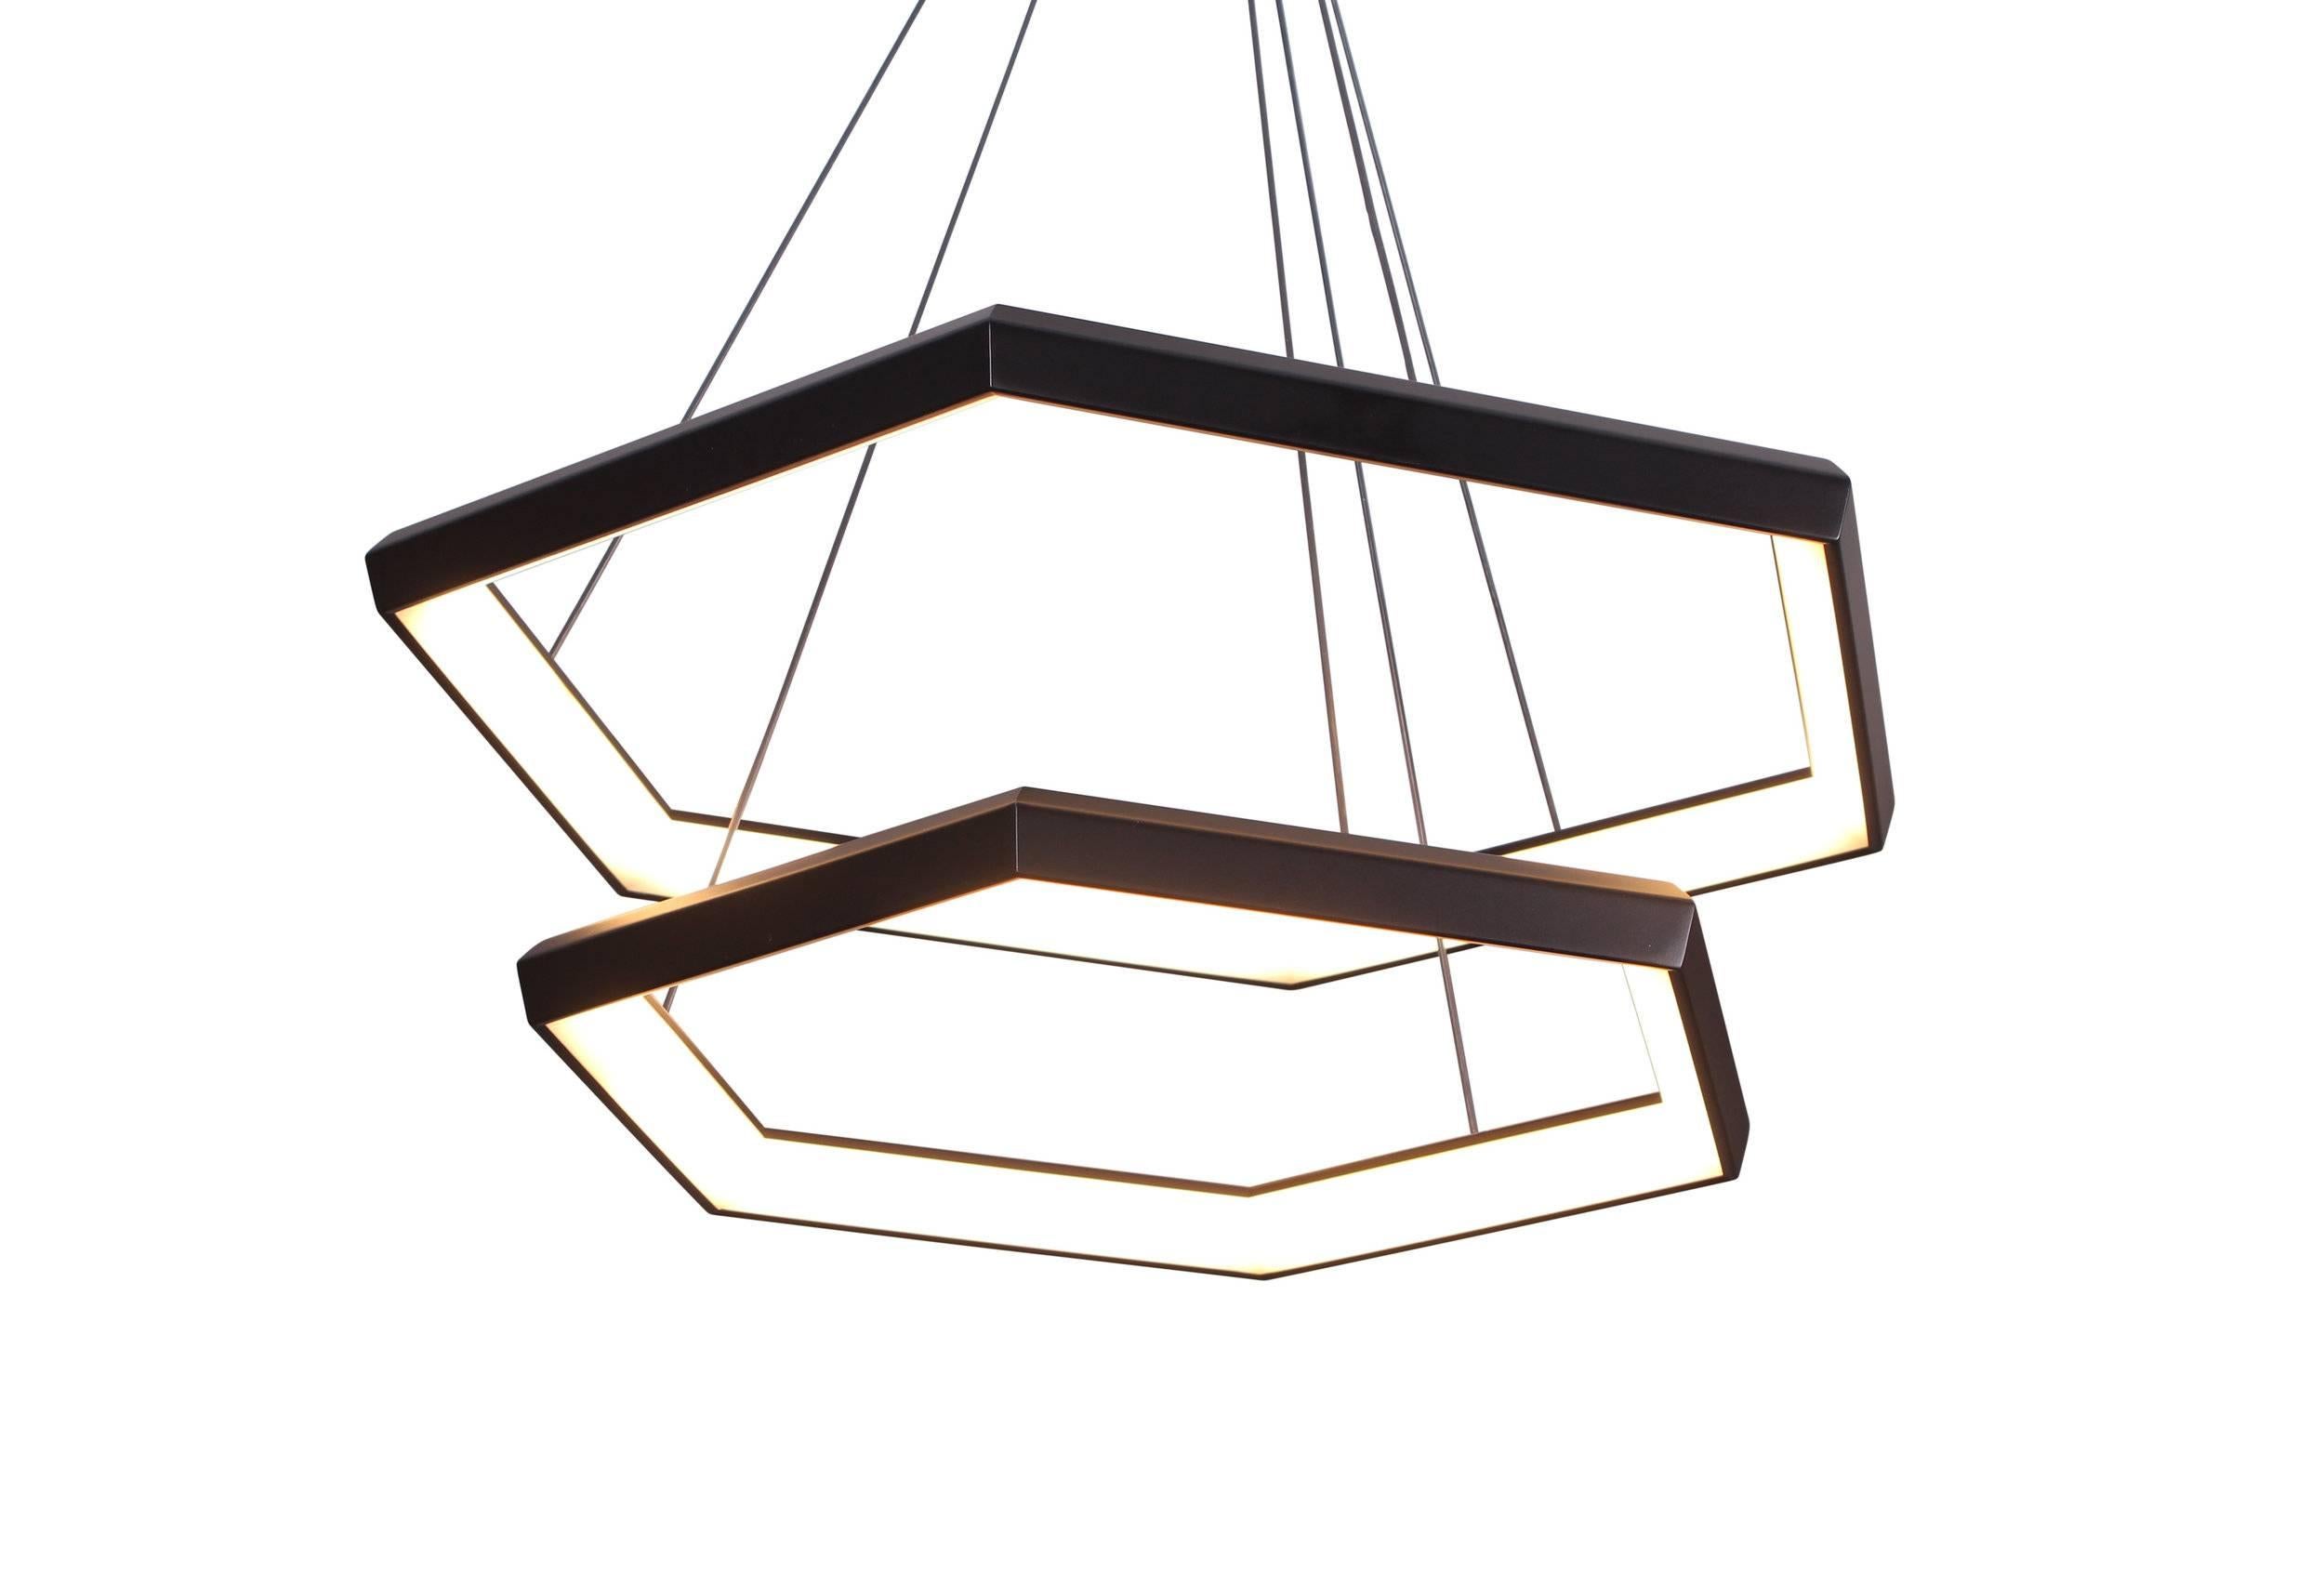 Hexia Cascade HXC28-2 is a streamlined and versatile line featuring the simple and balanced geometry of a convex hexagon. This fixture is composed of one HEXIA tier effortlessly suspended above the other.

Metal finish
Powder-coat finish available